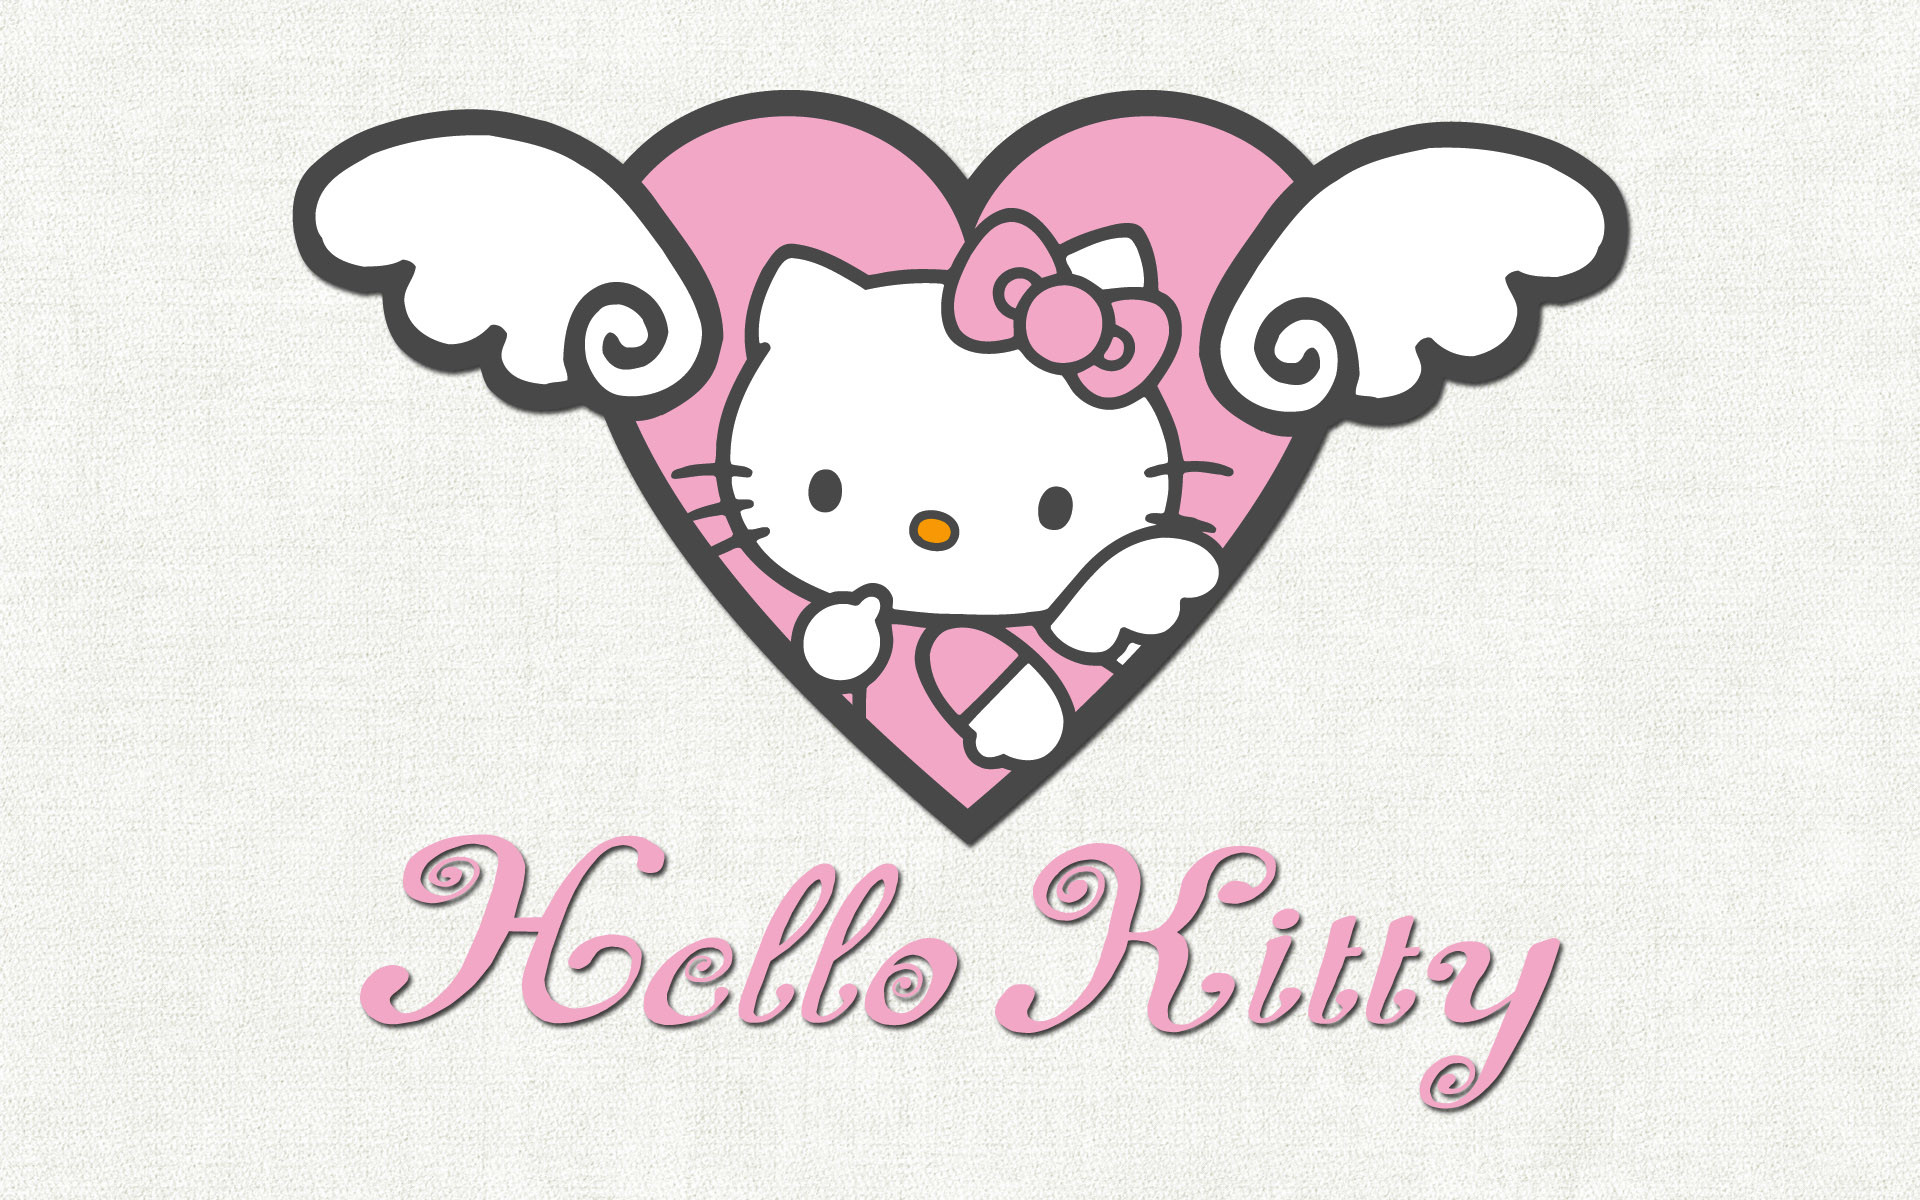 1920x1200 This is another big hello kitty wallpapaer, the size is and it's free too!  This new hello kitty wallpapers is hello kitty angel wallpapers.